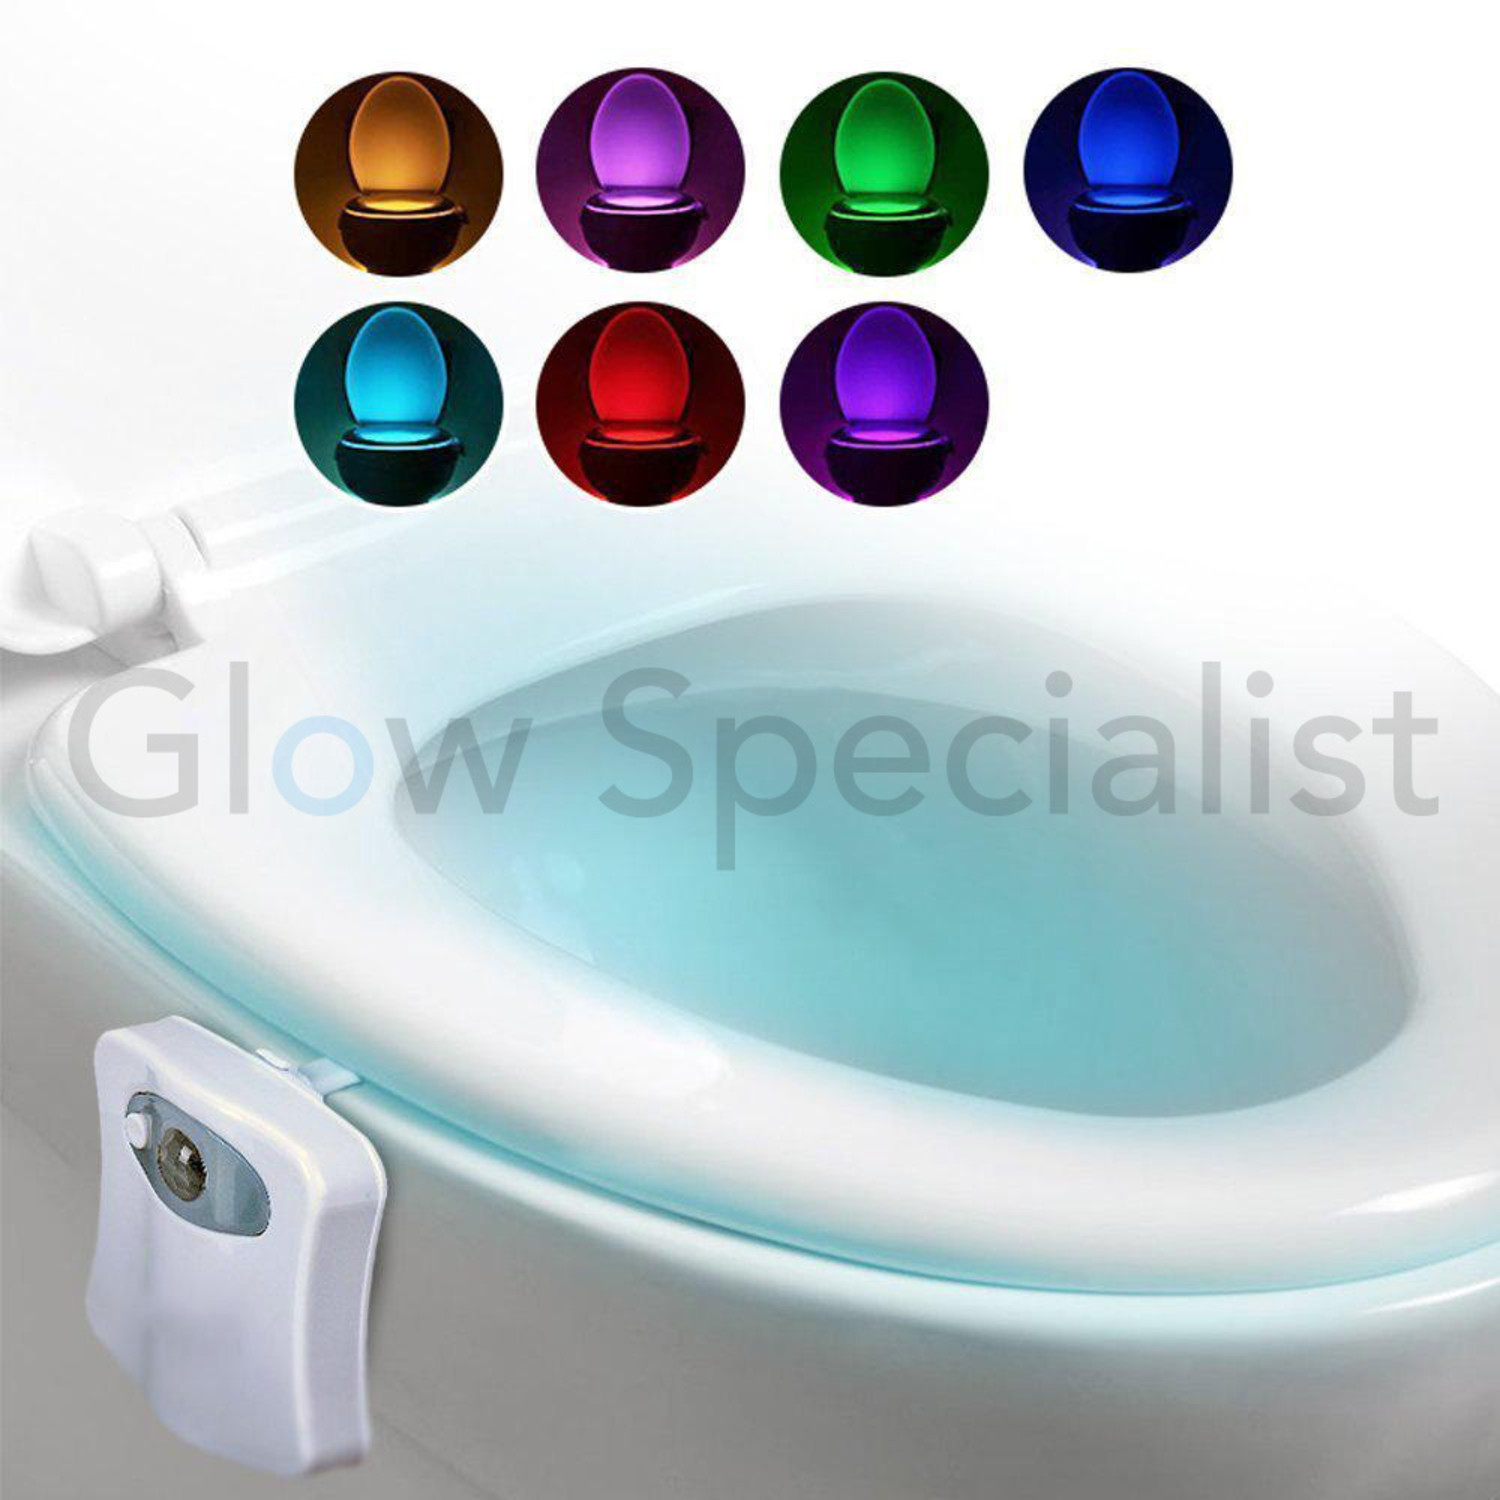 Glow Up Your Bathroom With This Bowl-Cleaning LED Neon Toilet Night Light